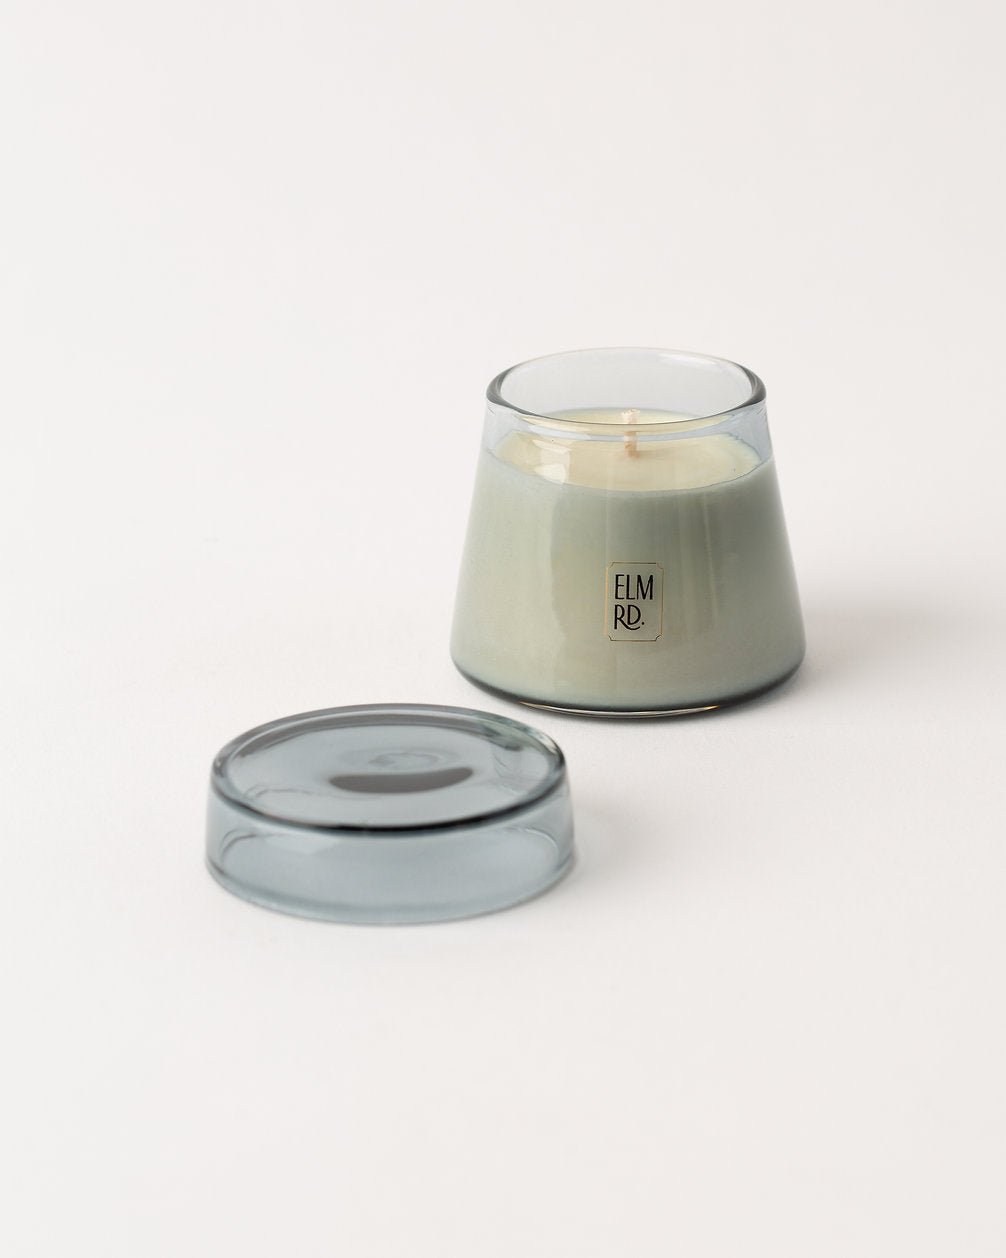 Chalet Mini Scented Candle - IOSOI Skin Lab